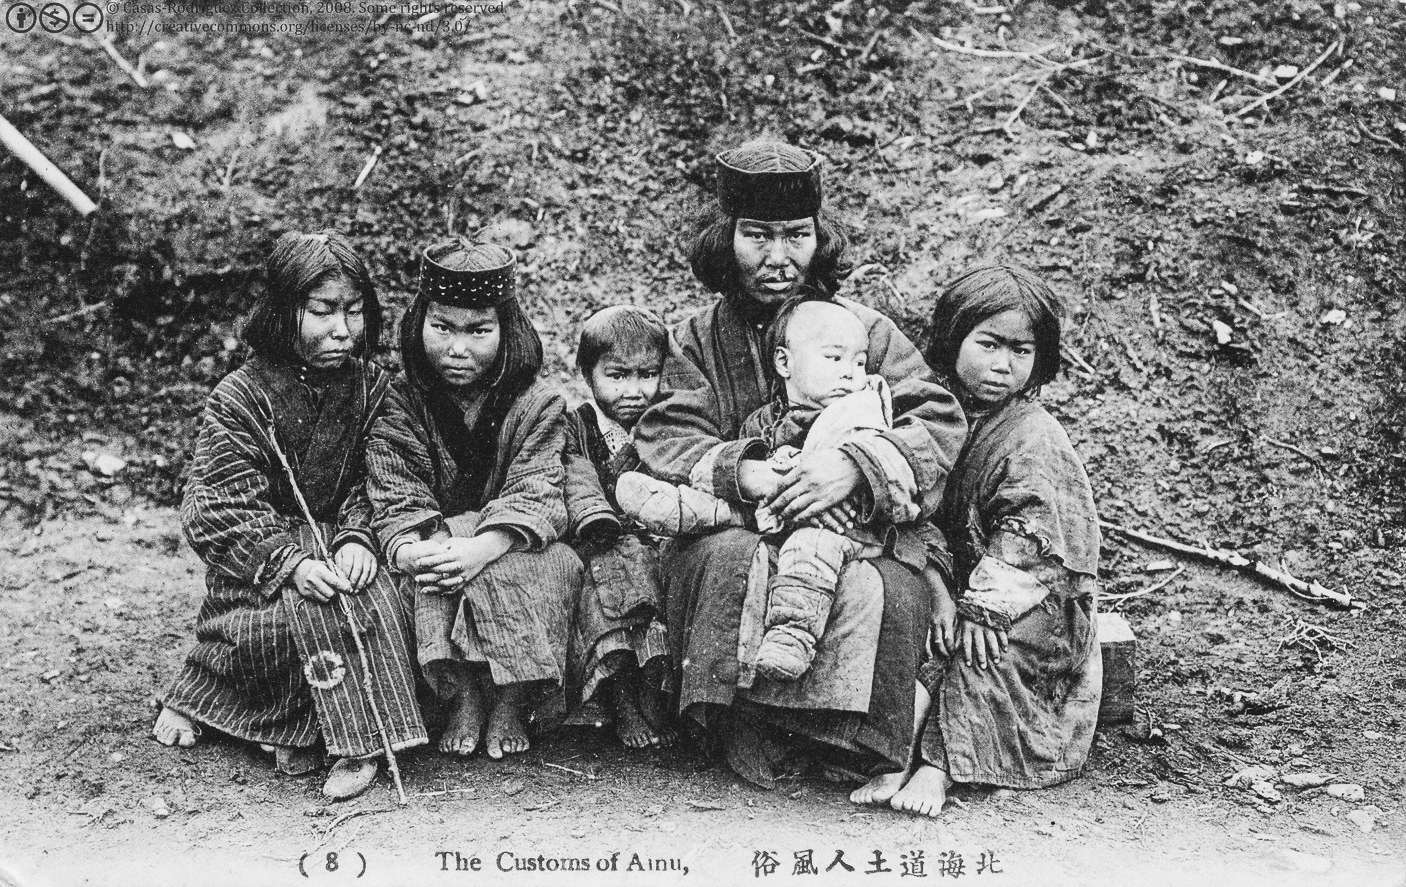 Ainu (also called Ezo in historical texts) are an ethnic group indigenous to Hokkaidō, the Kuril Islands, and much of Sakhalin. There are most likely over 150,000 Ainu today; however the exact figure is not known as many Ainu hide their origin due to racial issues in Japan